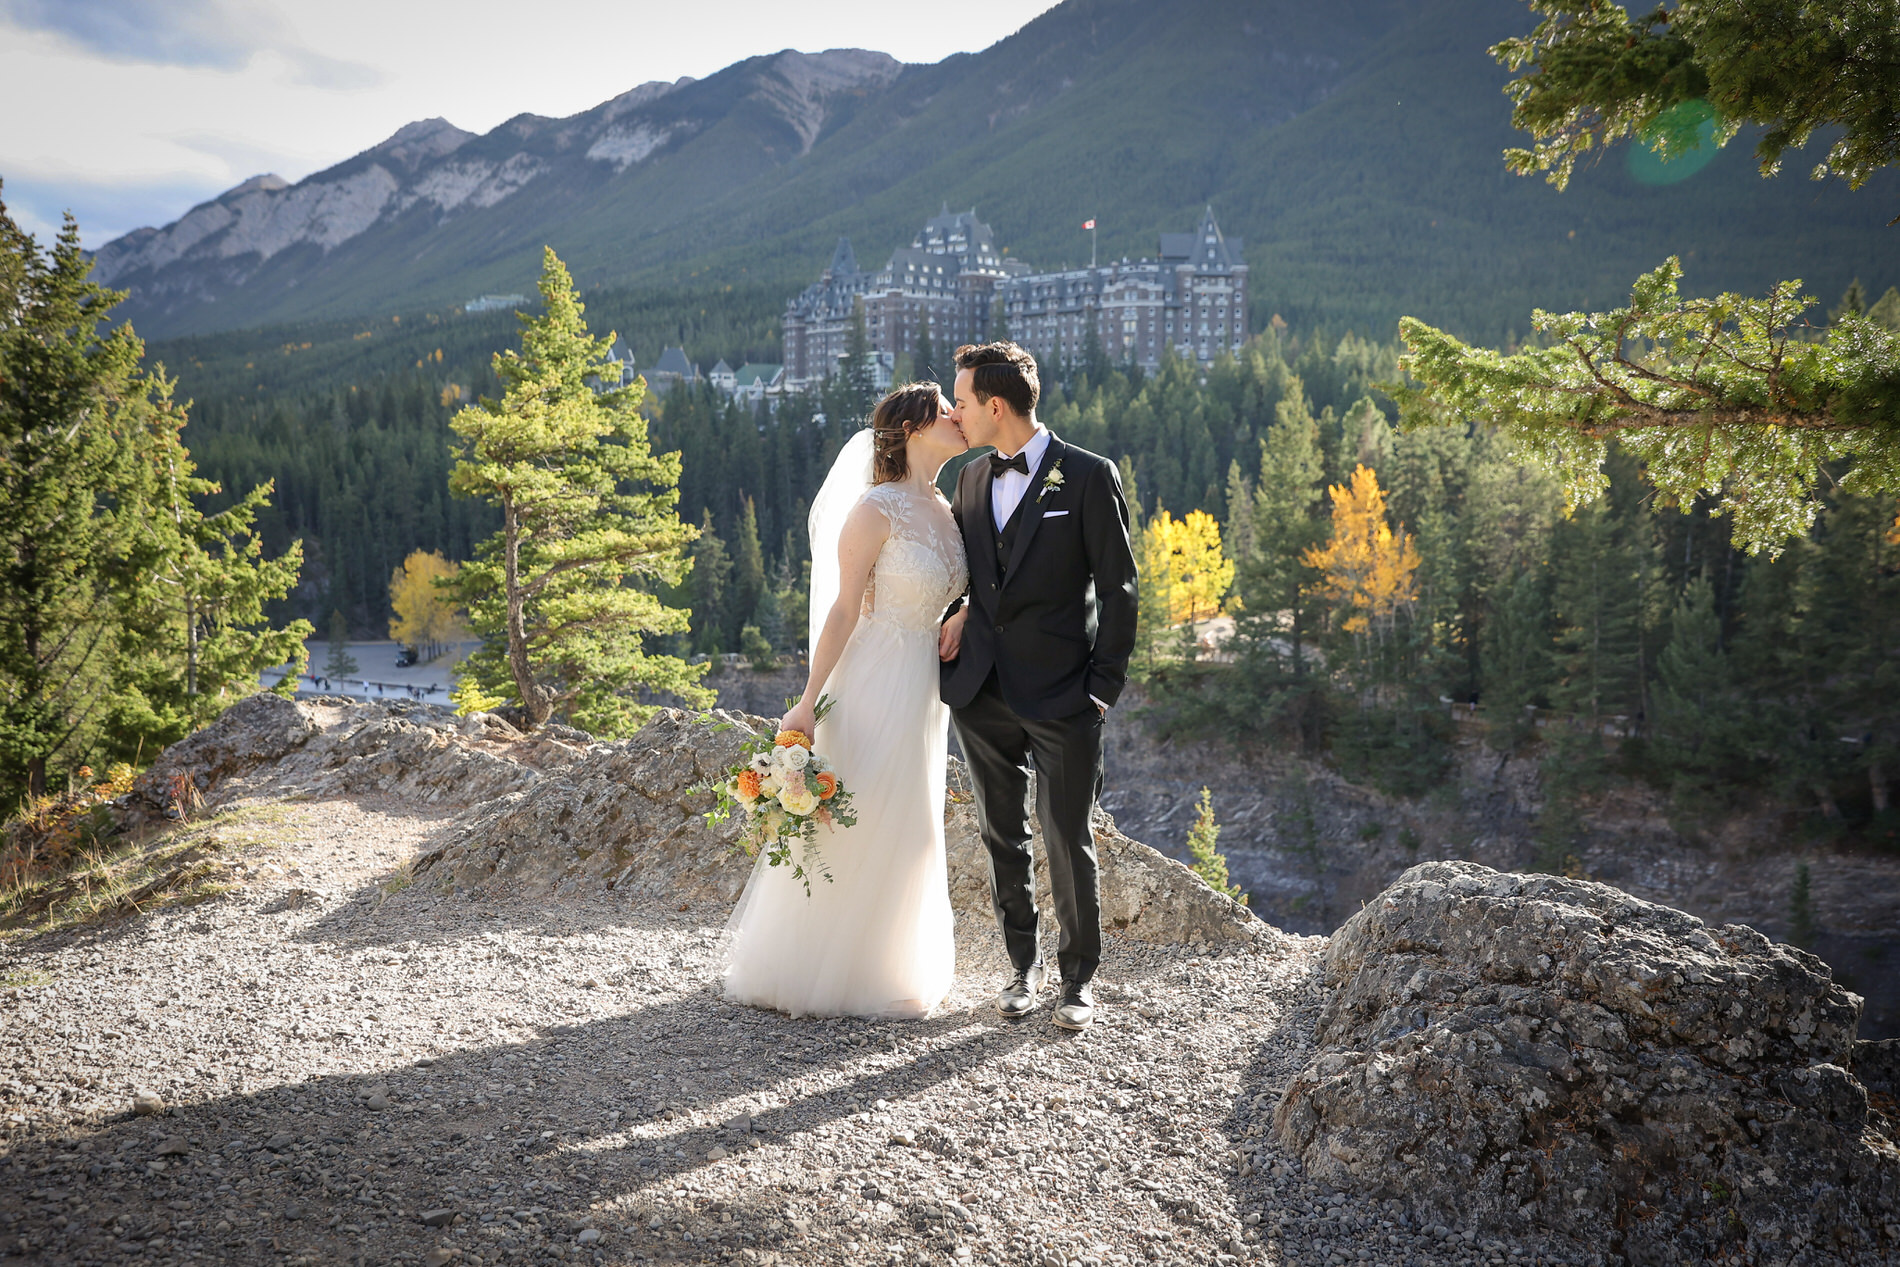 Bride and Groom take wedding photos at Surprise Corner in Banff with Fairmont Hotel in the background